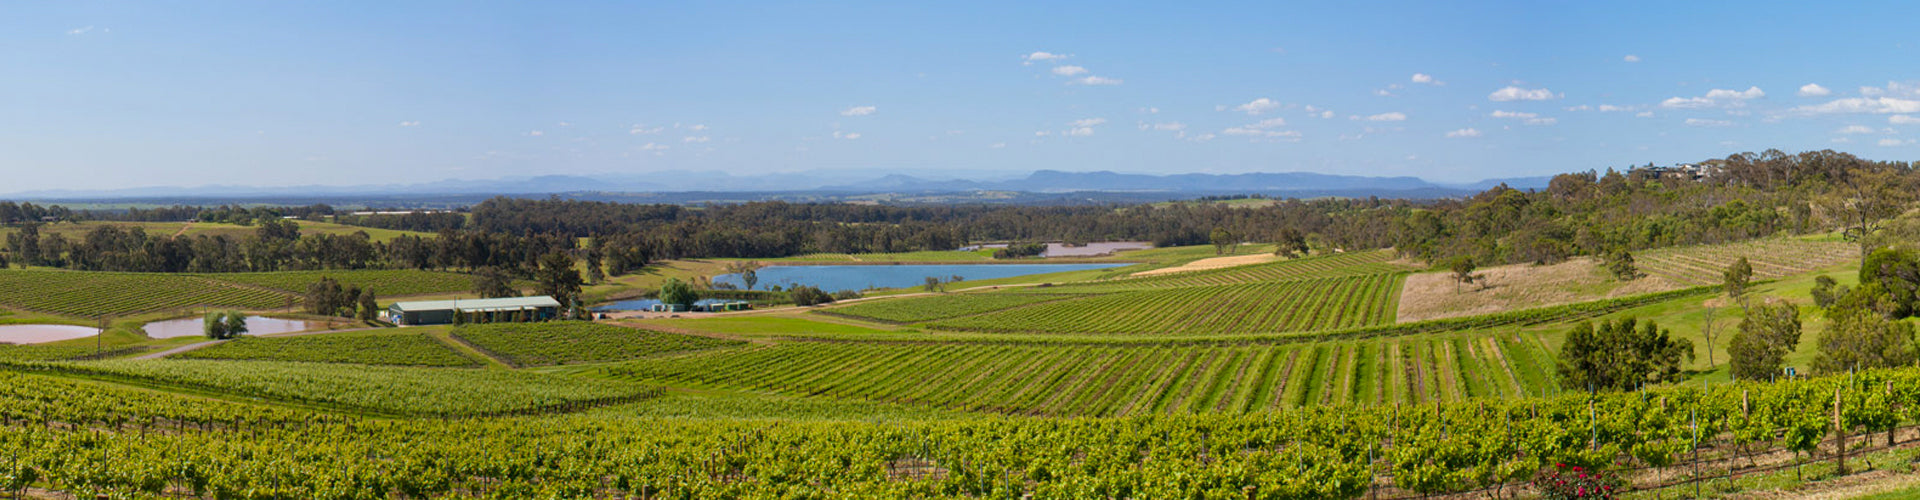 Hunter Valley Vineyards in Australia's New South Wales